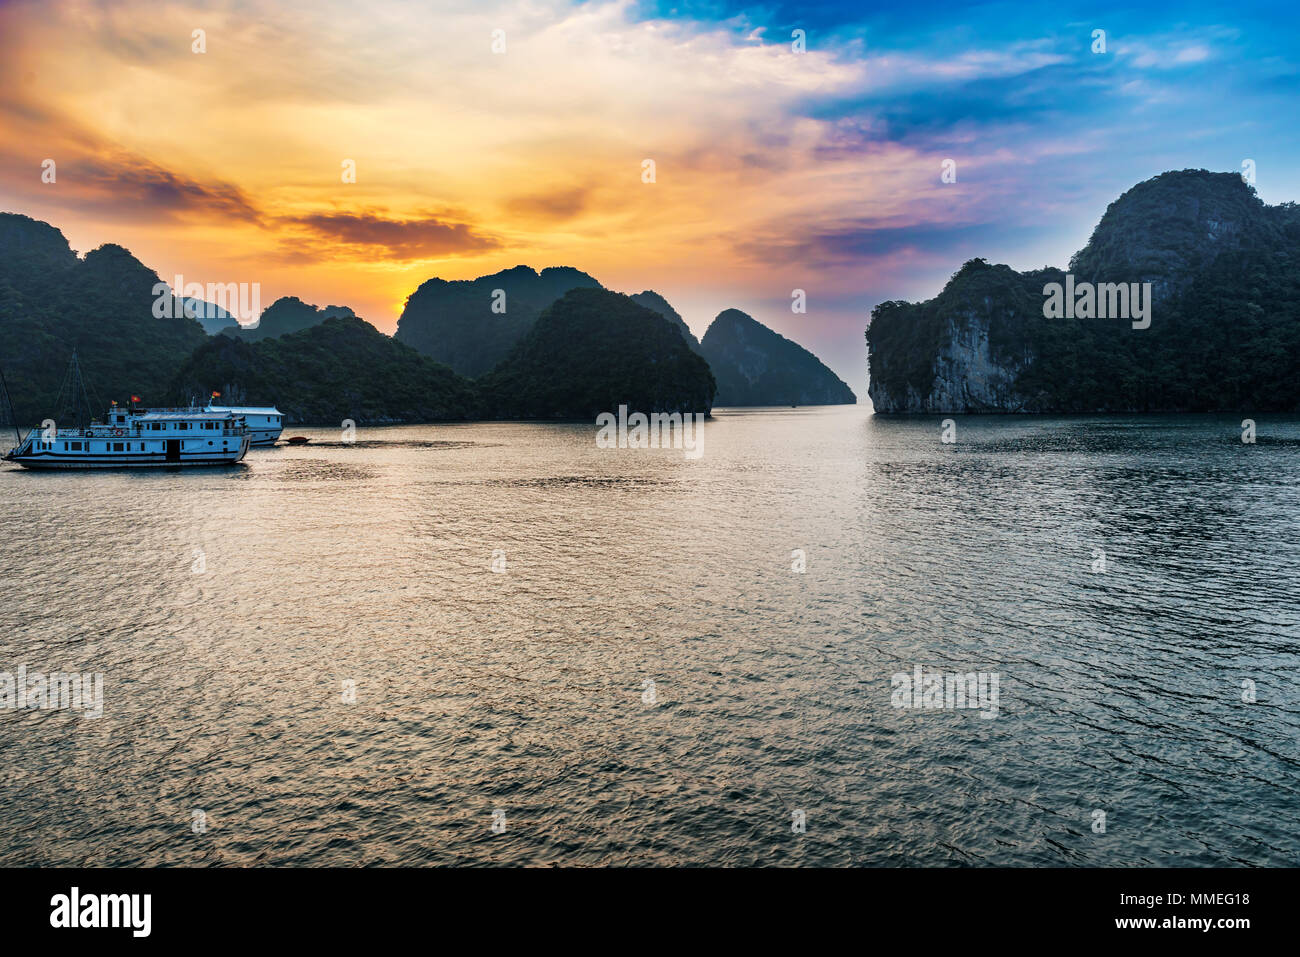 Sunset in Halong Bay, Vietnam. It is Unesco World Heritage Site and most visited place near Hanoi. Stock Photo